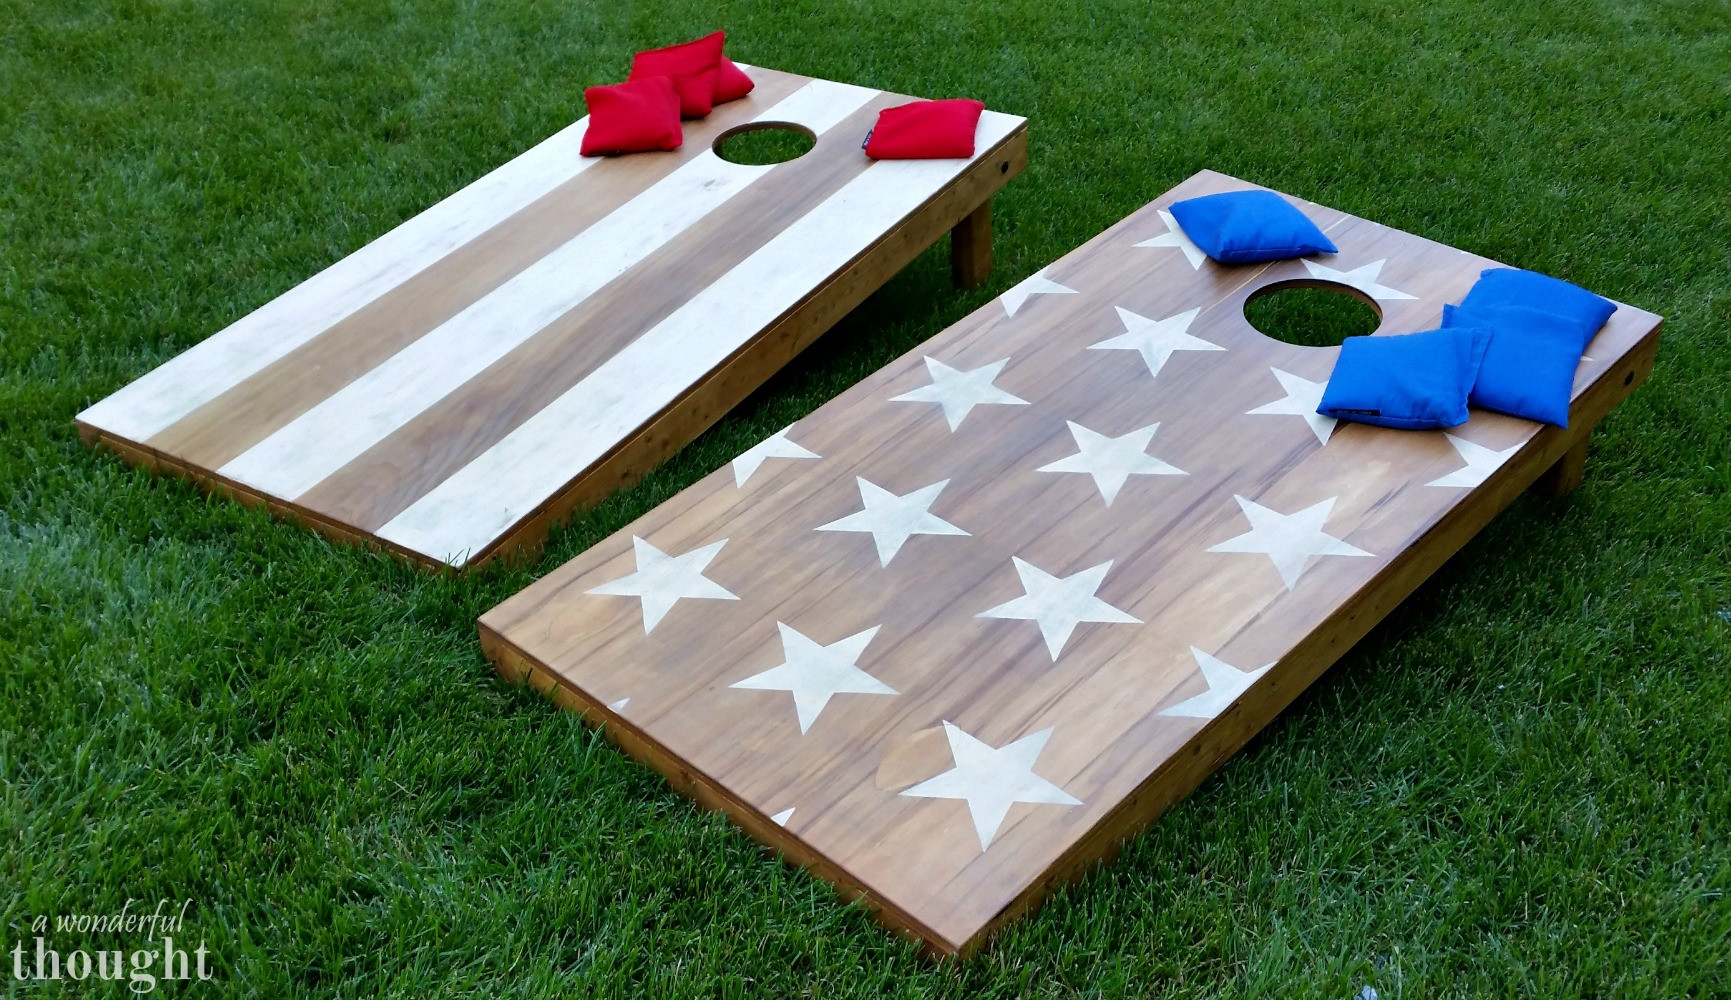 DIY Wooden Games
 Yard Games 10 Giant Options You Can DIY from Yahtzee to